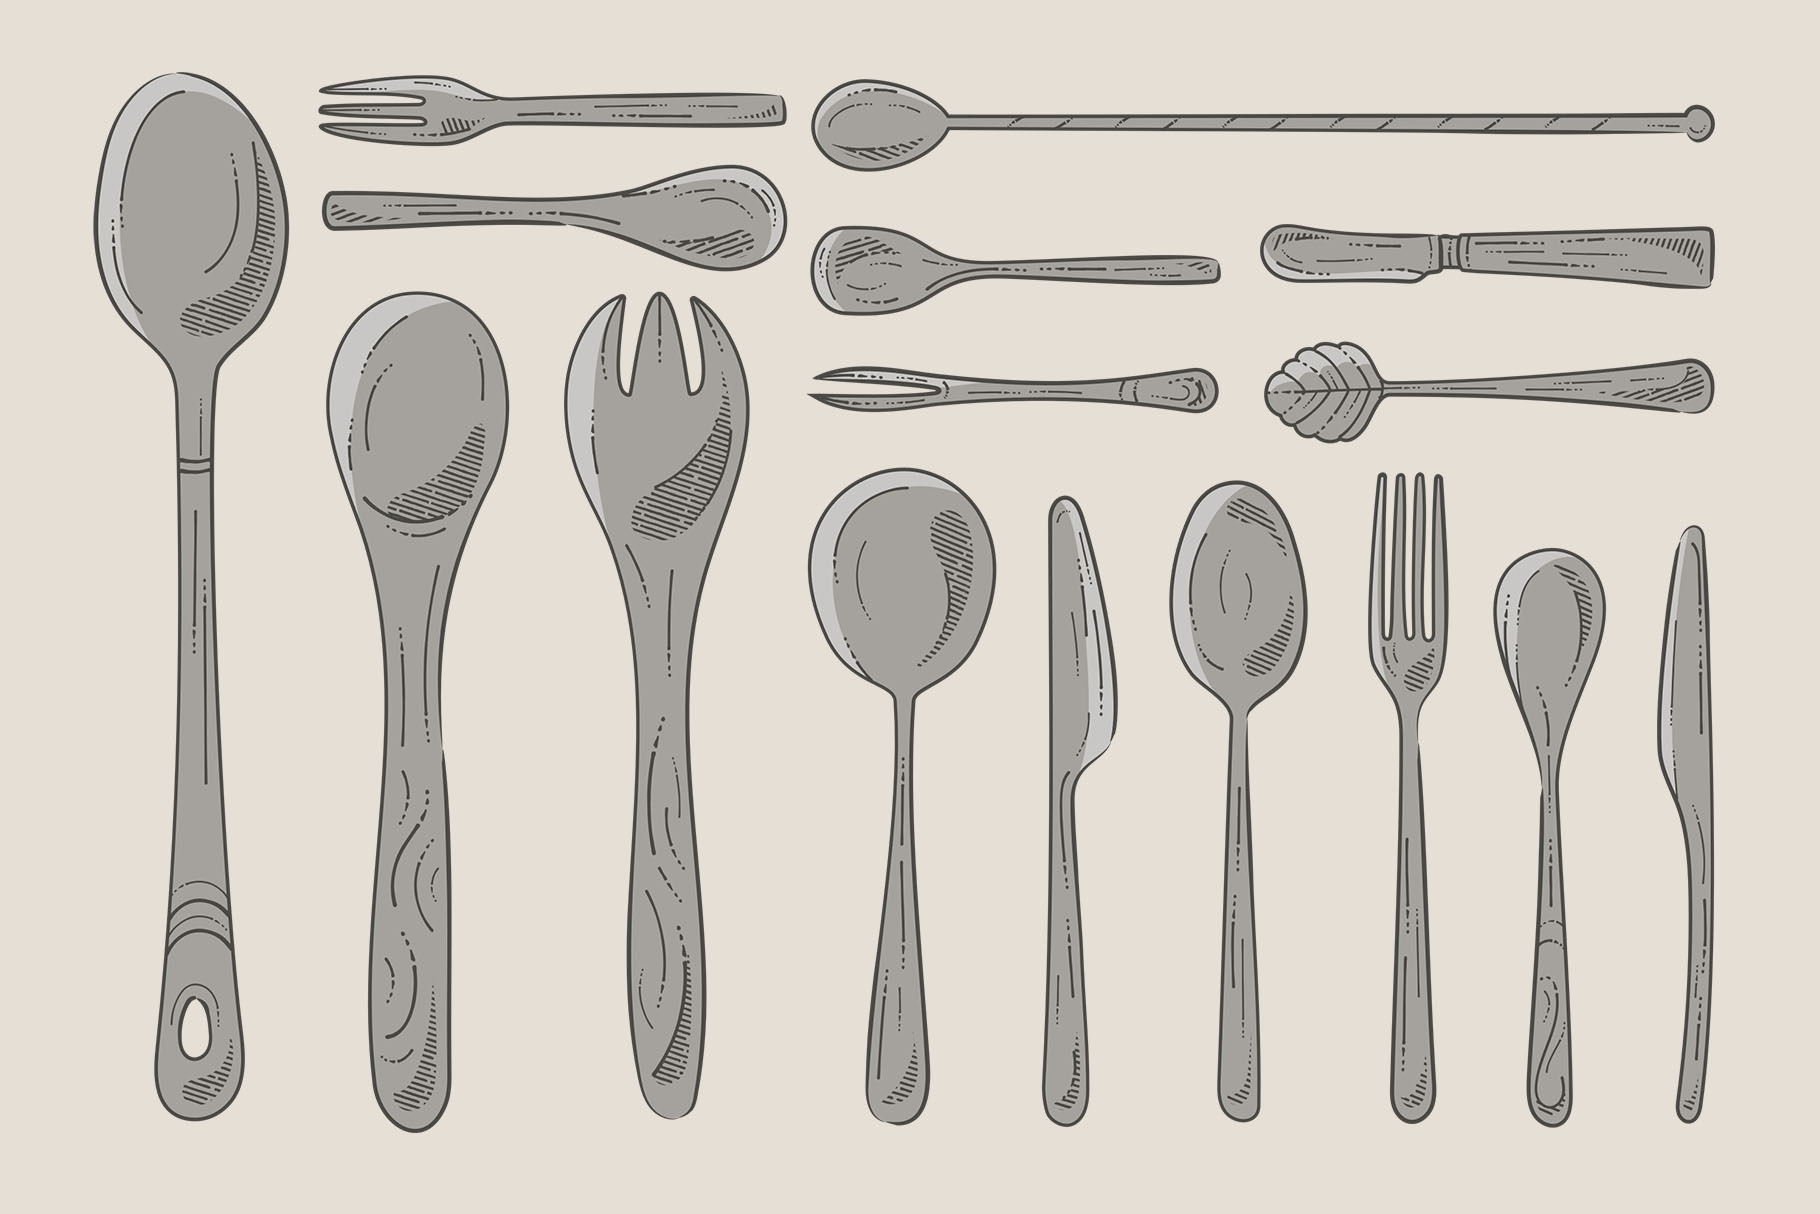 Cutlery Illustrations (AI, EPS, PNG Format)